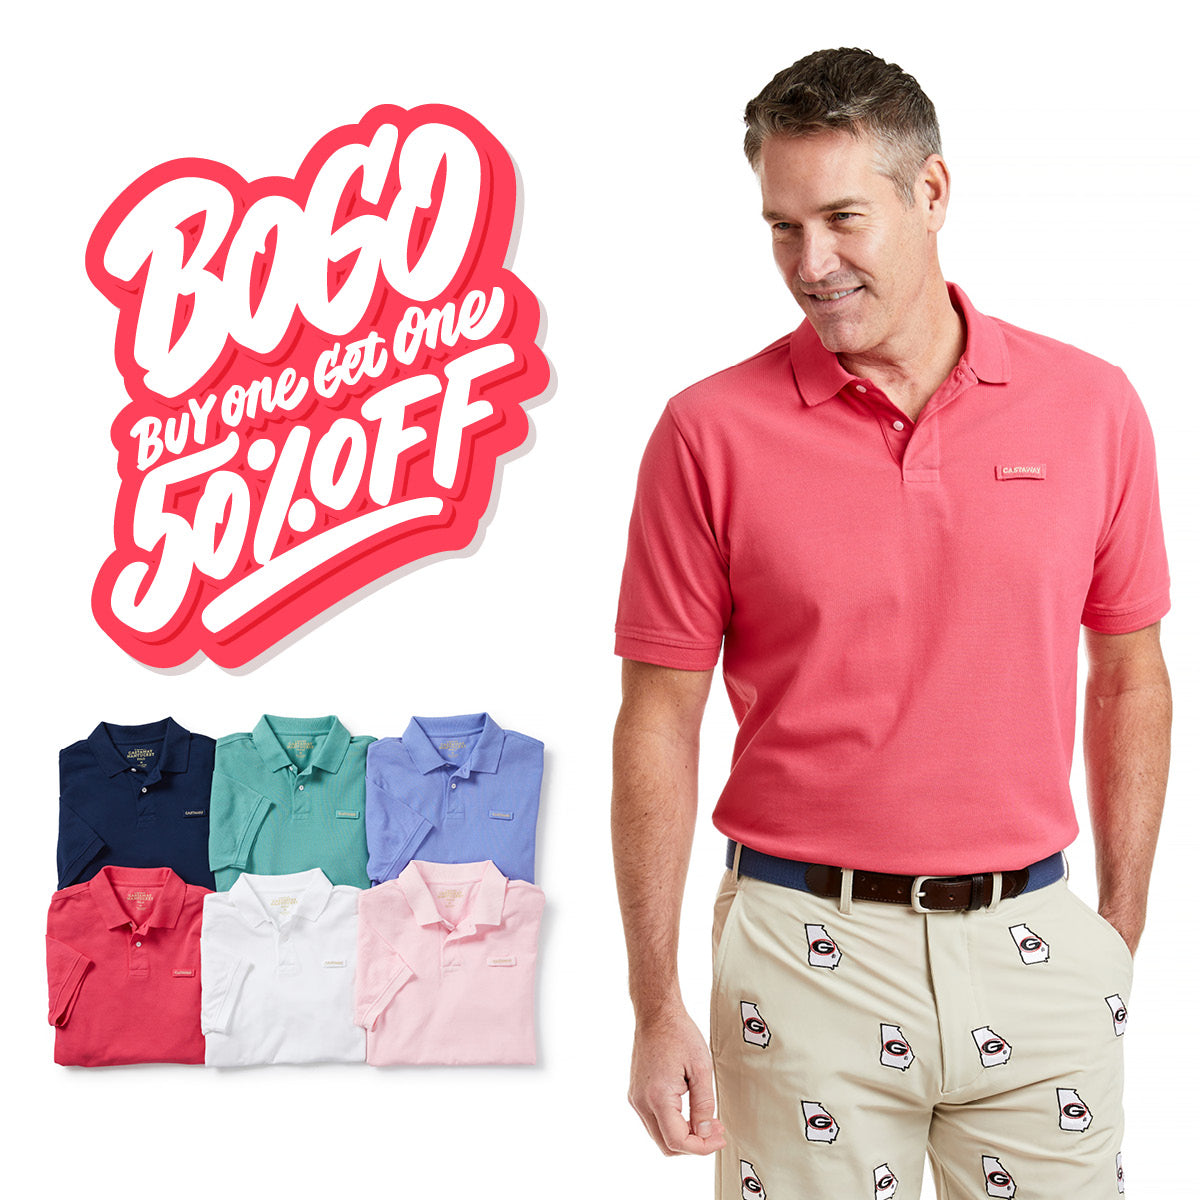 The Polo Bogo. Buy one and get one 50% off. 